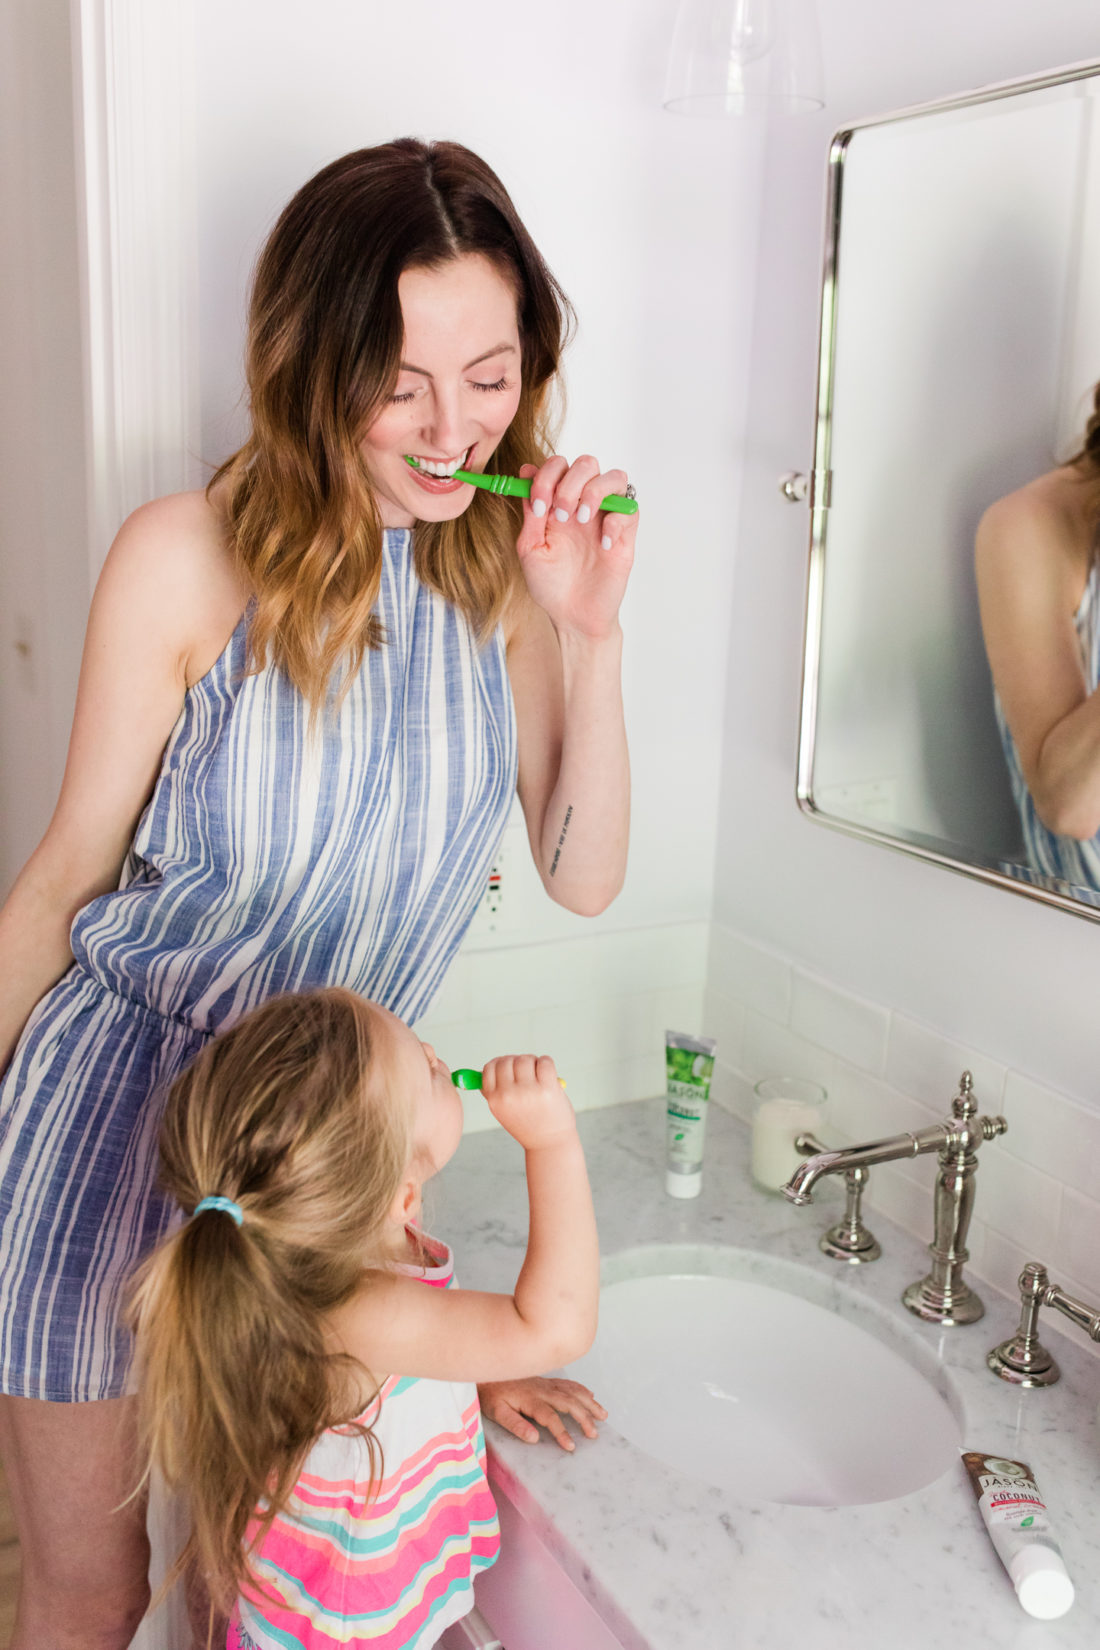 Eva Amurri Martino wears a blue and white striped romper and brushes her teeth with two year old daughter, Marlowe, in the bathroom of their Connecticut home